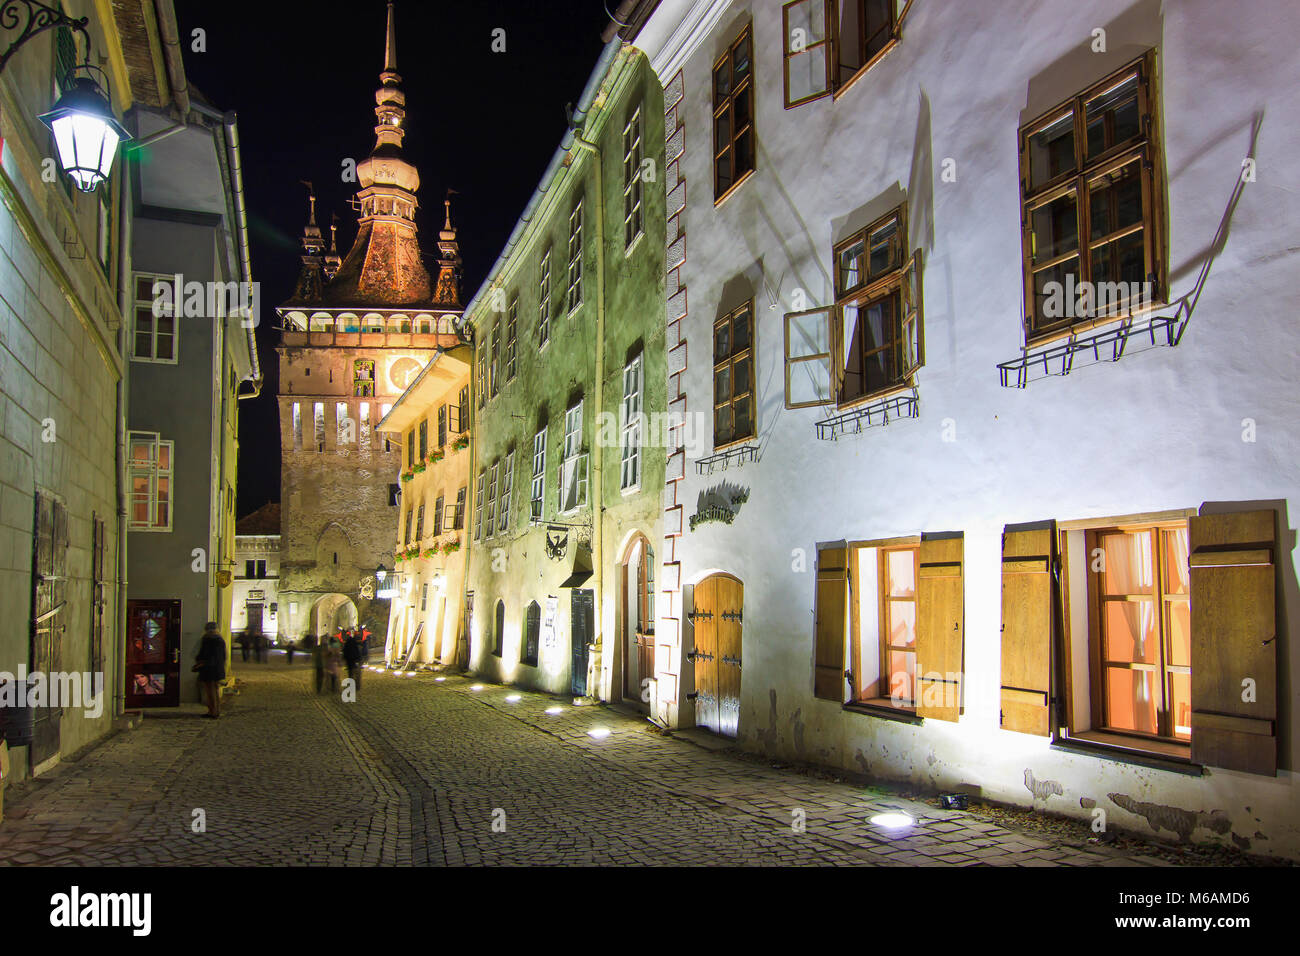 Sighisoara, Transylvania, Romania, 2012: Colorful houses in the old walled town center. Traditional architecture. Night view. Stock Photo